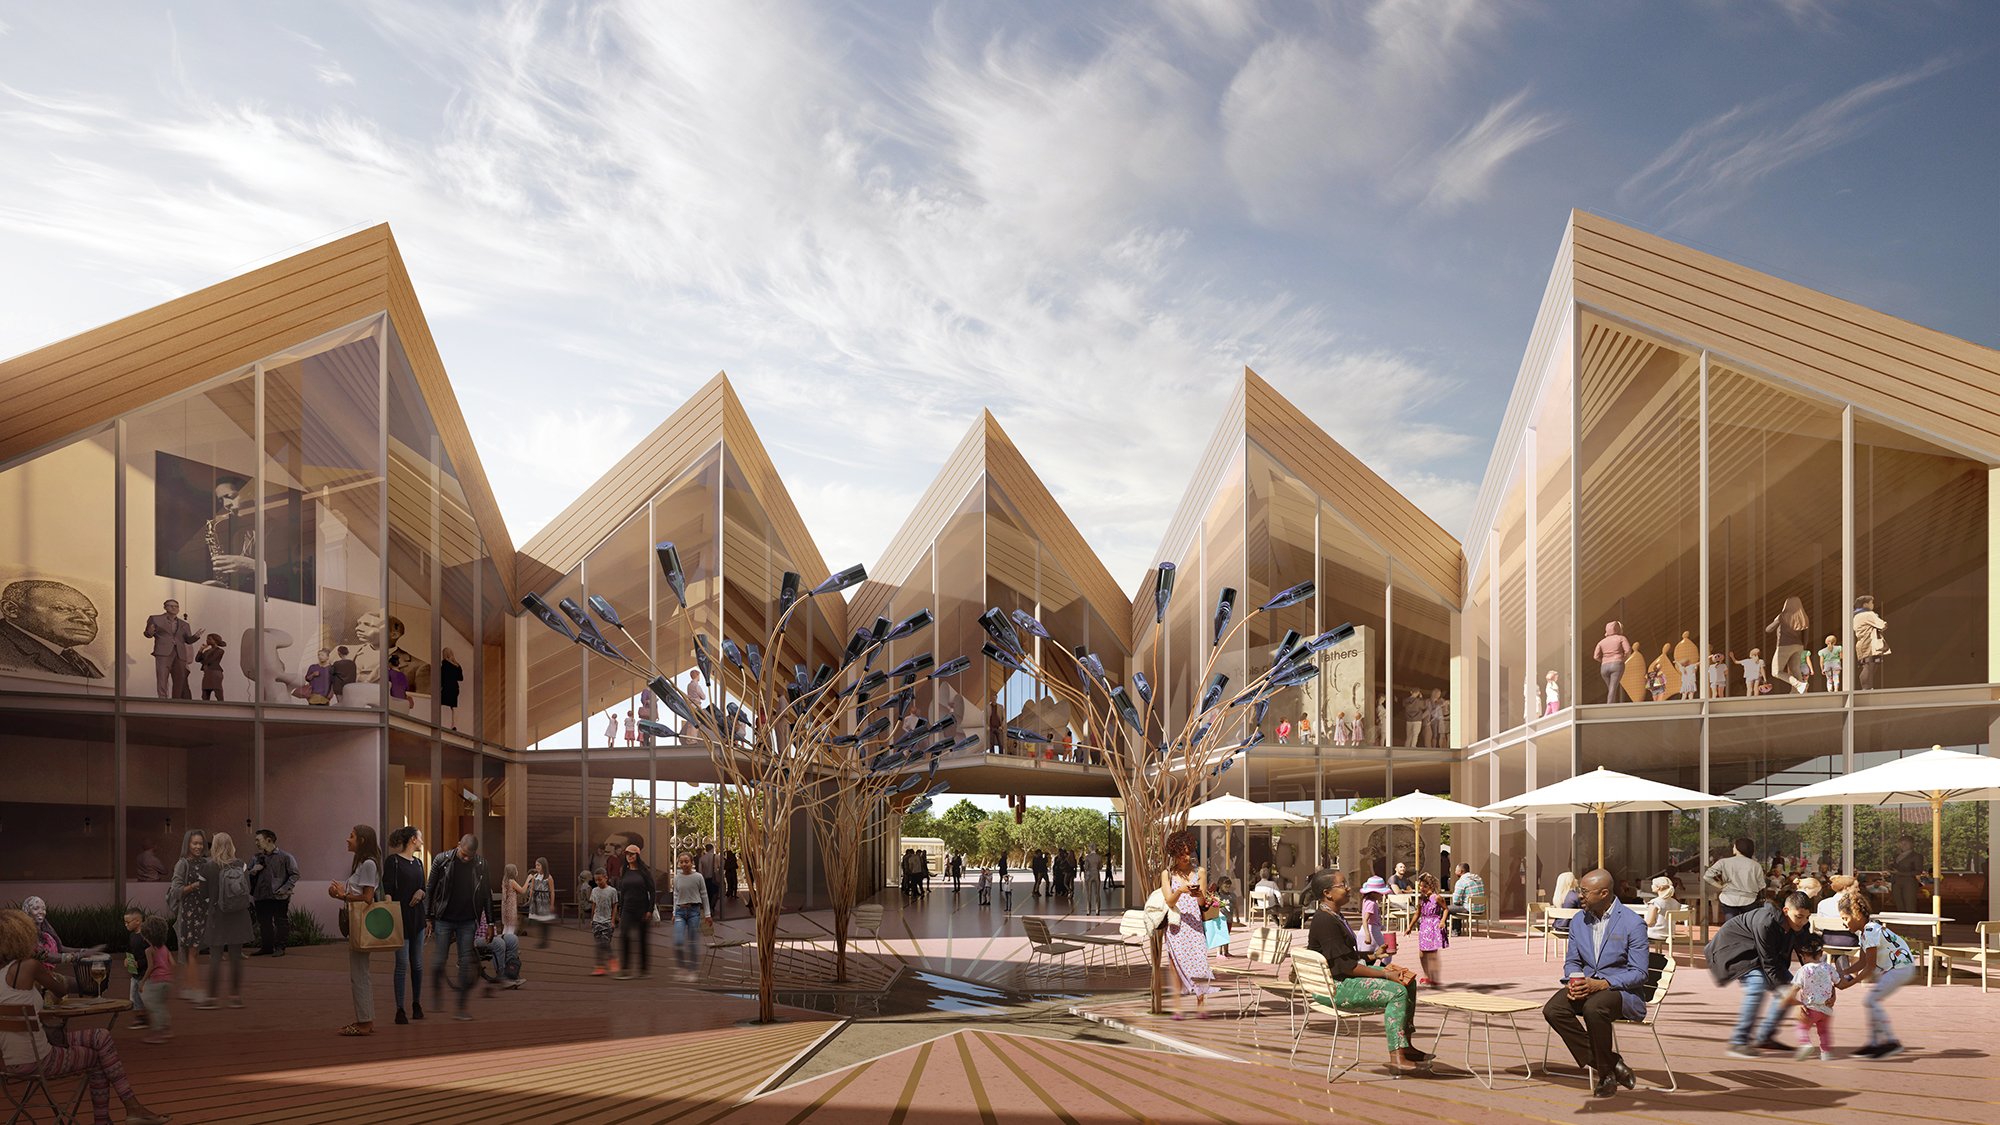 A rendering of the Juneteenth Museum site shows a cluster of matching hoomes with glass facades and pointed, gabled roofs around a central courtyard with sculptural trees. Rendered people rest, talk and explore the site.